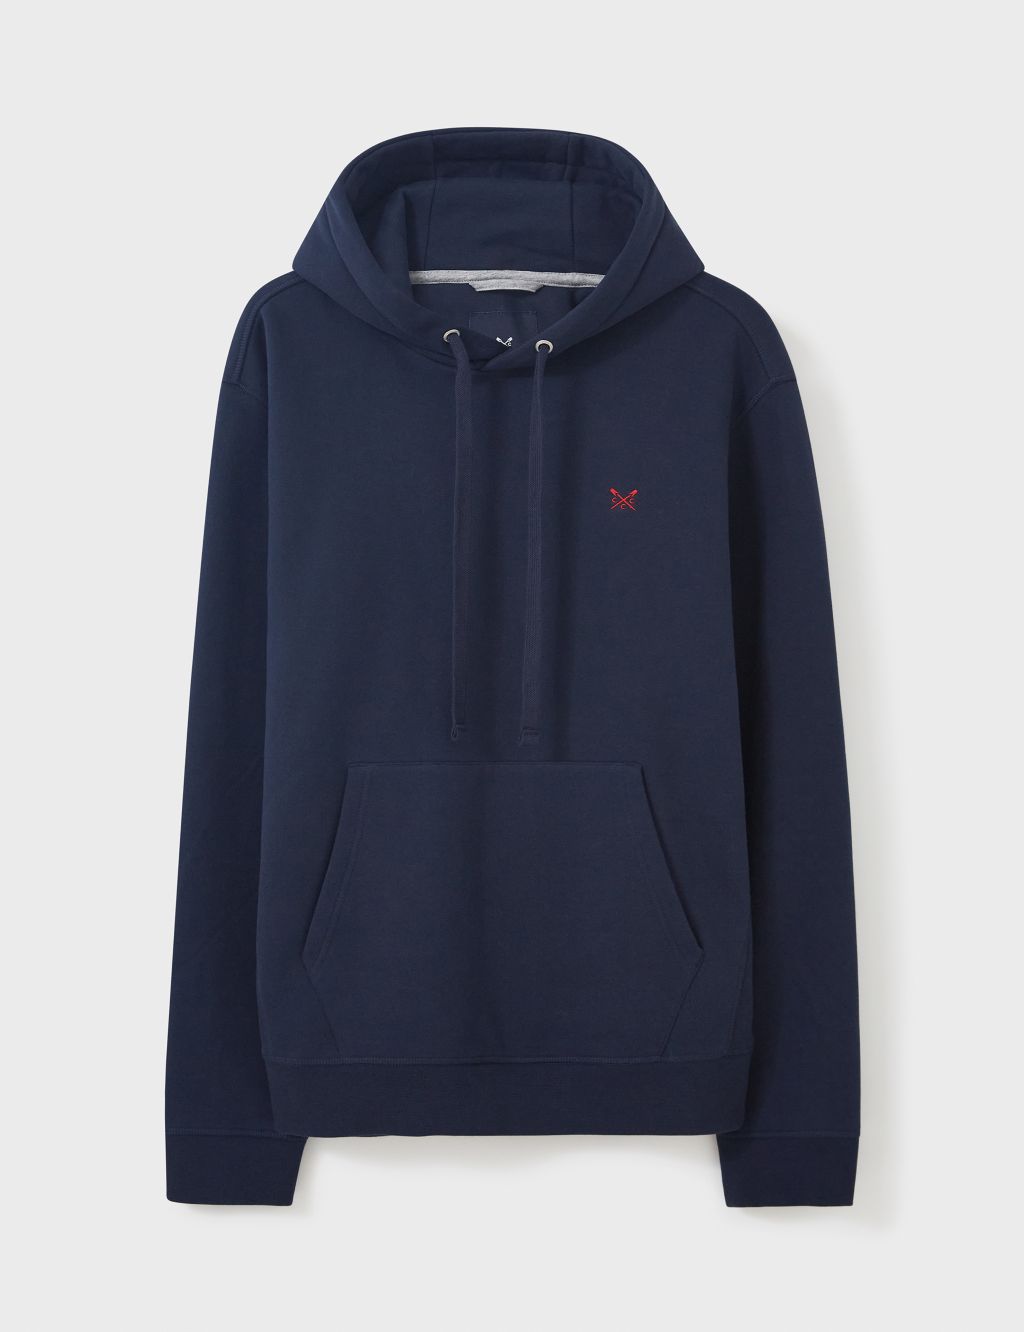 Cotton Rich Hoodie image 2